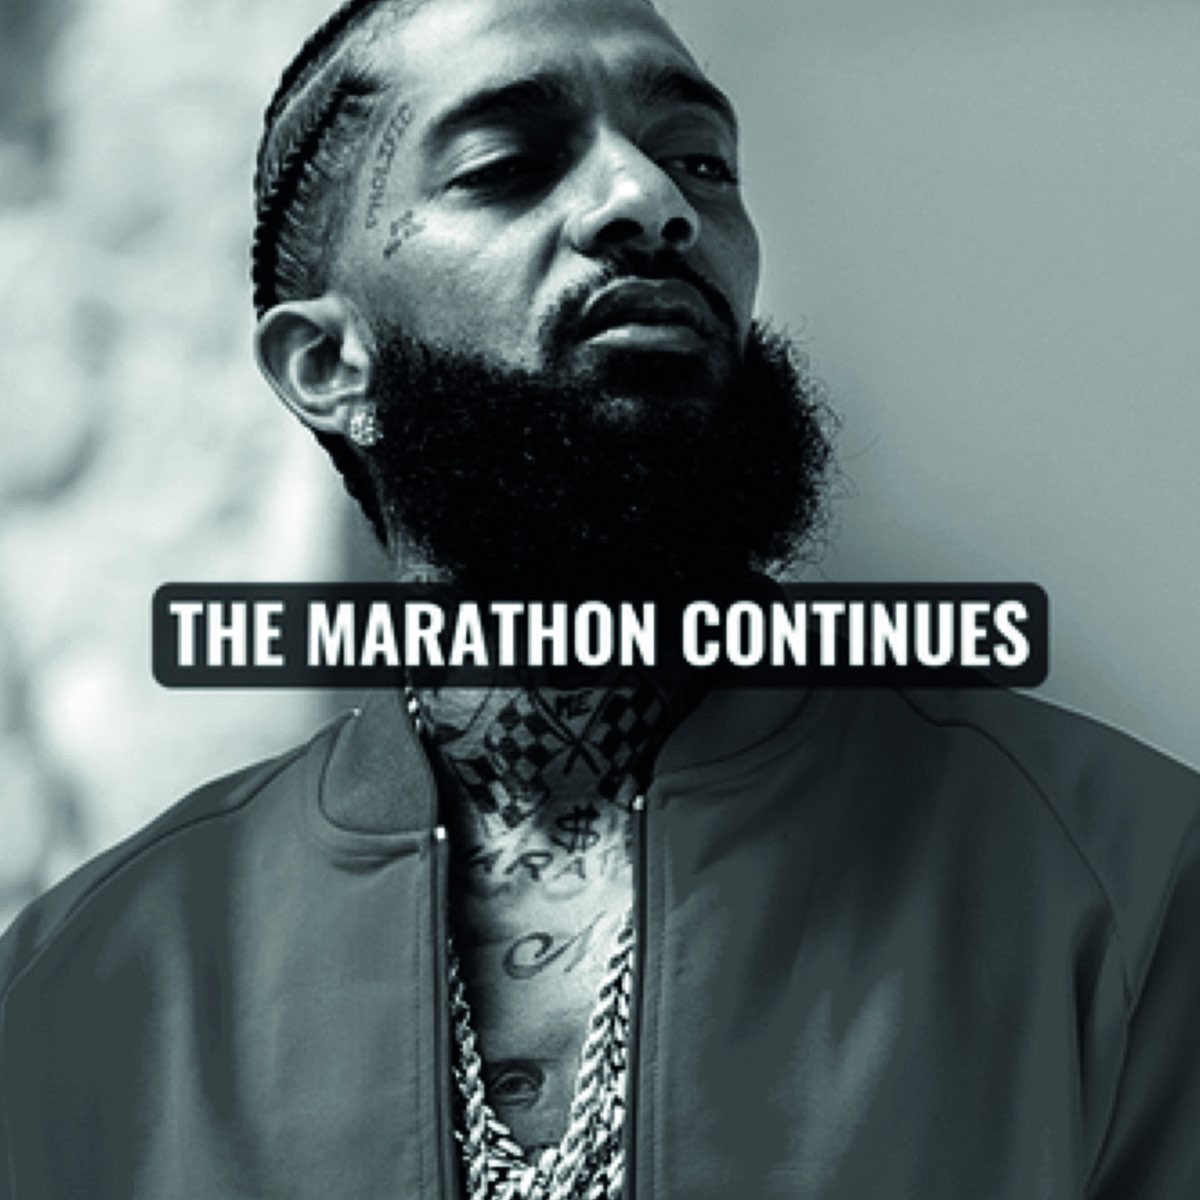 The marathon continues HD wallpapers  Pxfuel